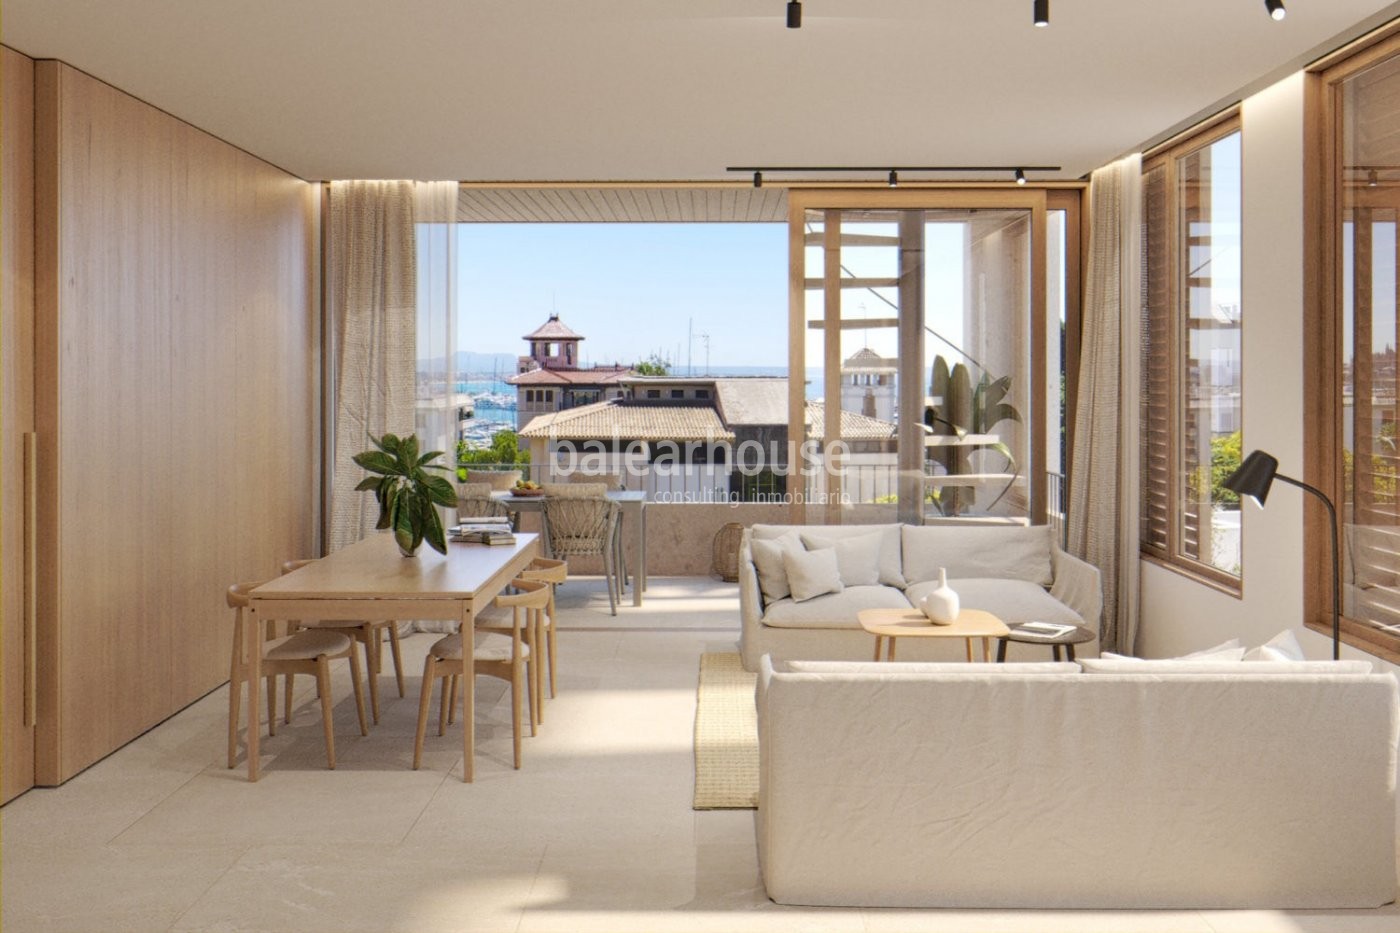 Fabulous newly built penthouse with swimming pool and solarium in the area of Son Armadans in Palma.